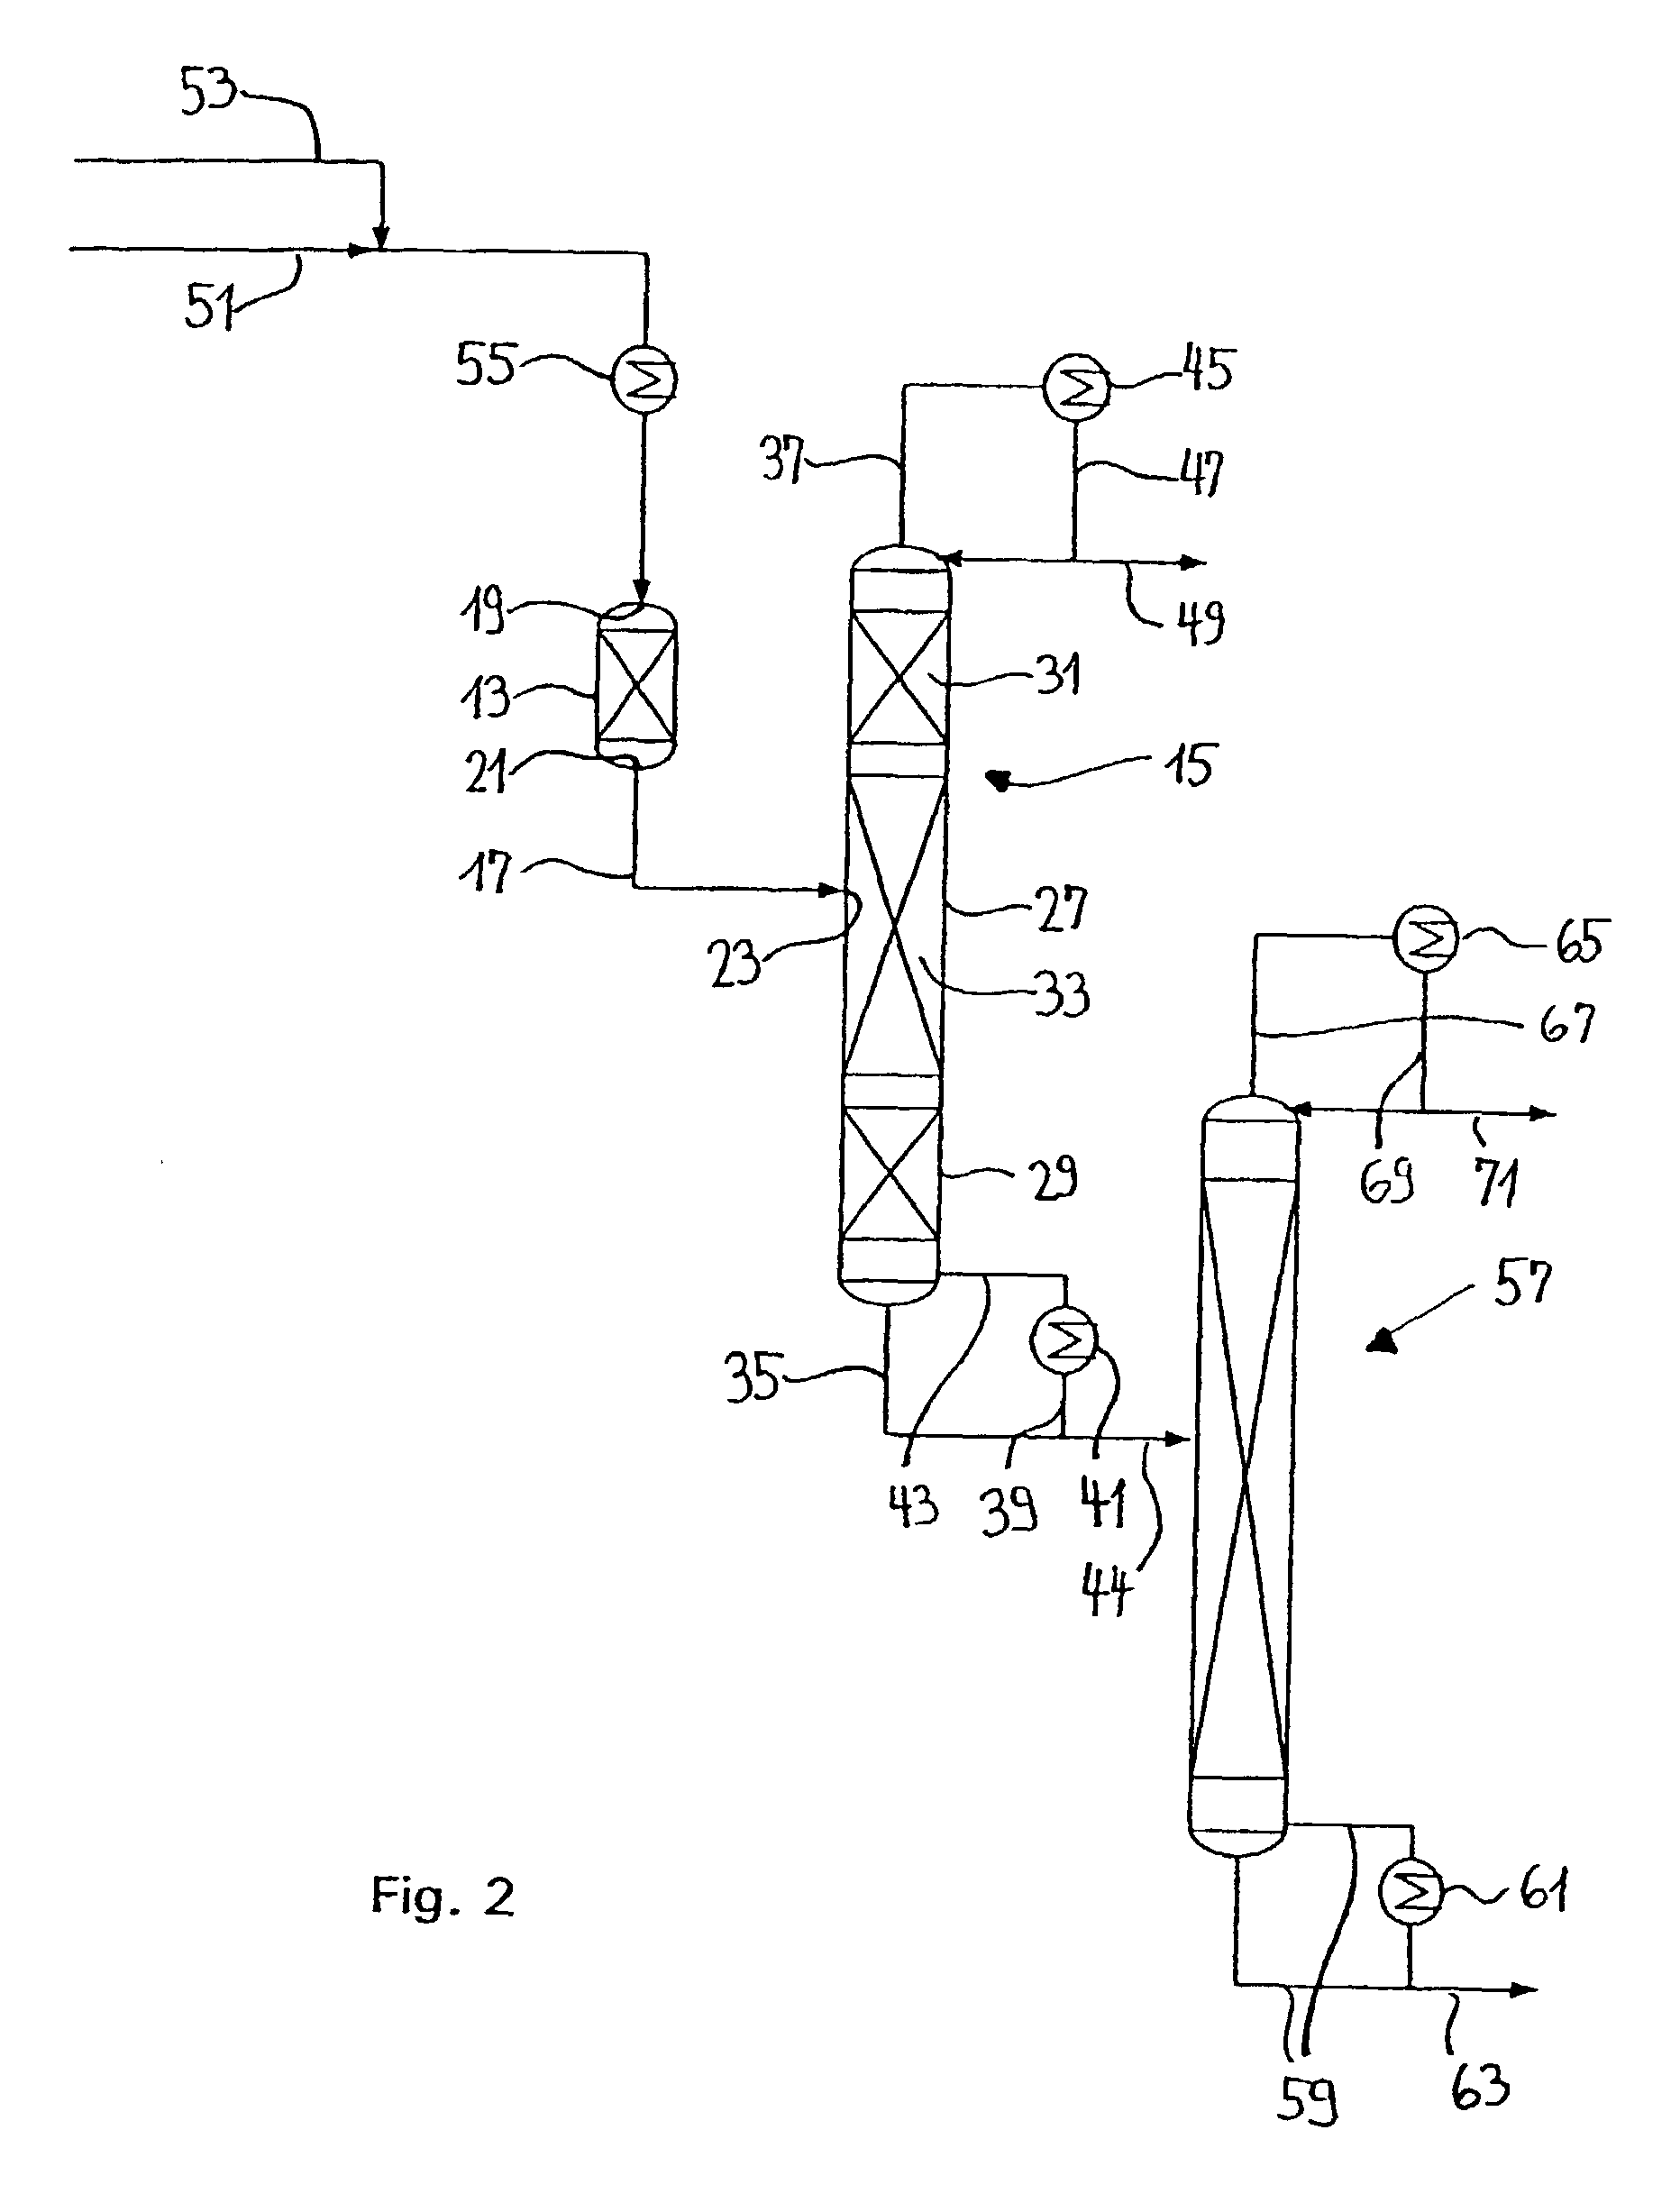 Process and device for hydrolytically obtaining a carboxylic acid alcohol from the corresponding carboxylate